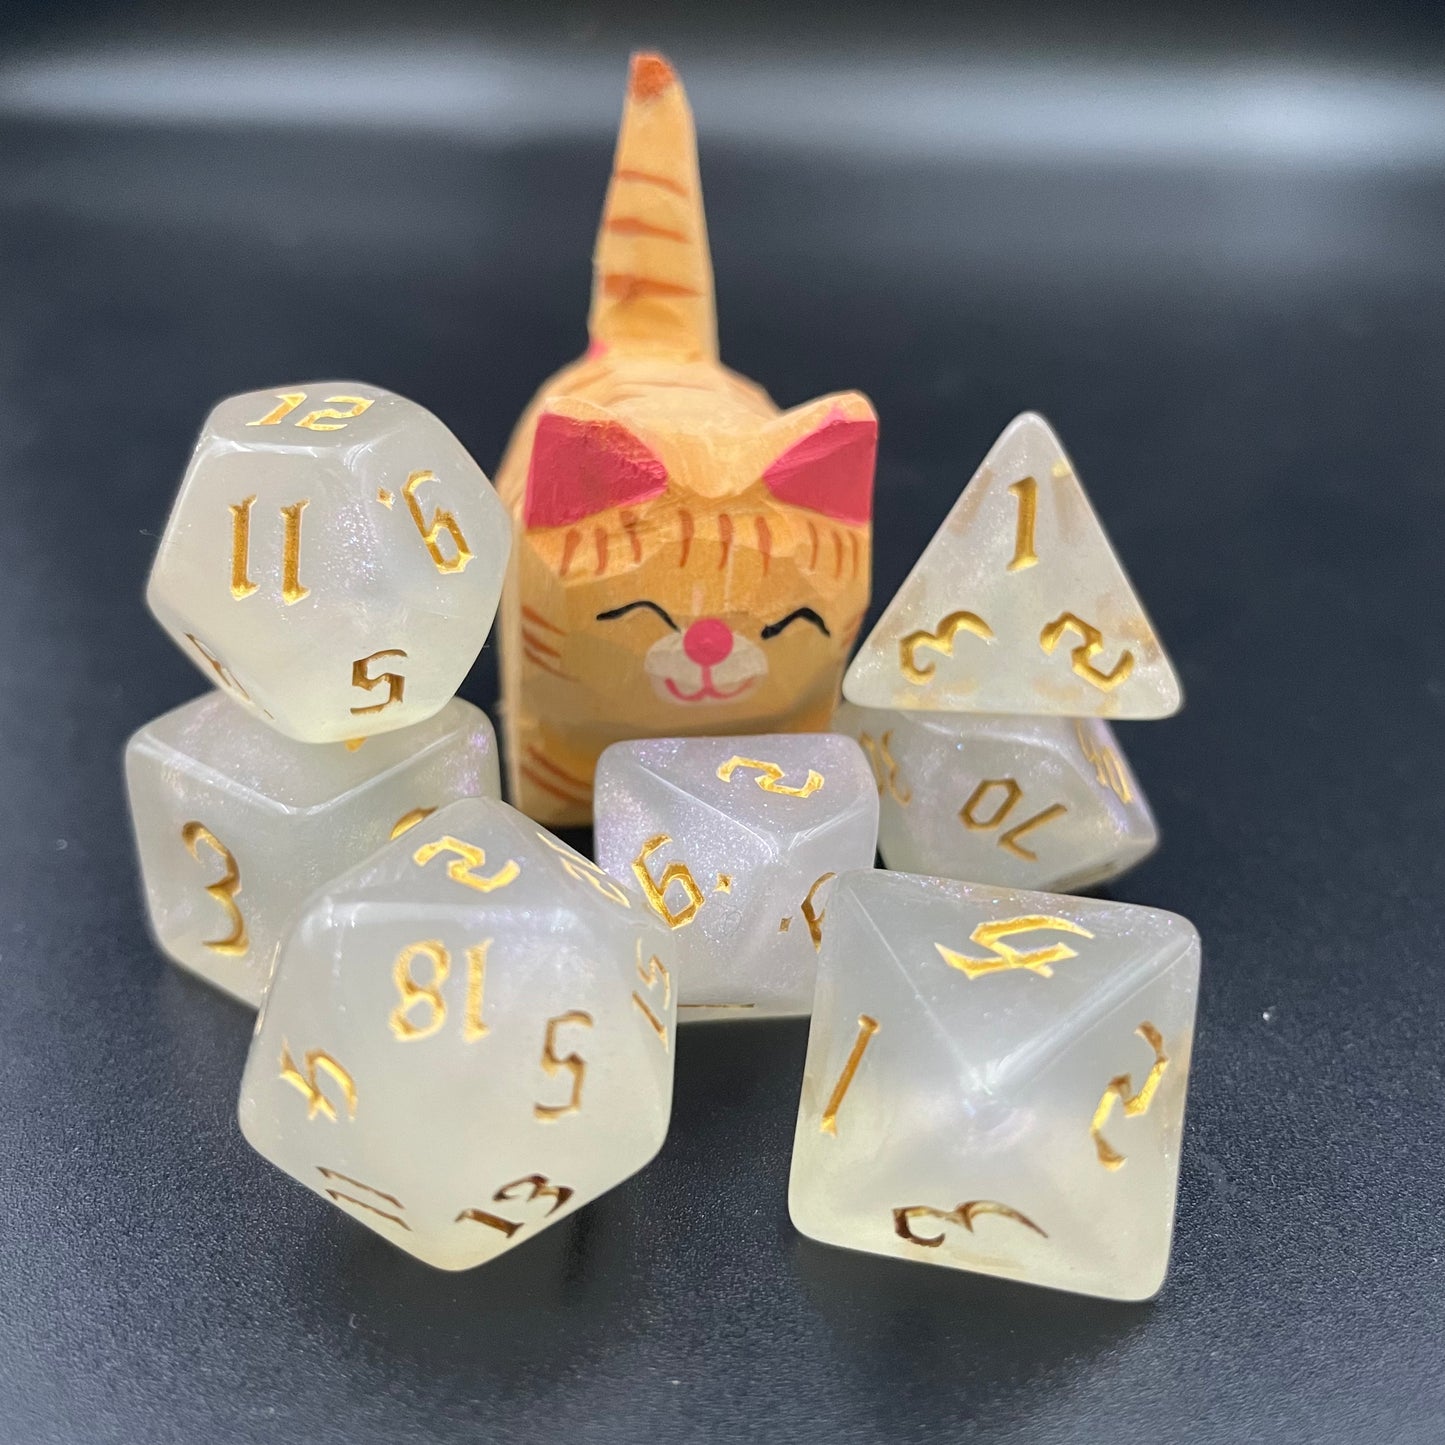 FREE Today: Angel DnD Dice Set